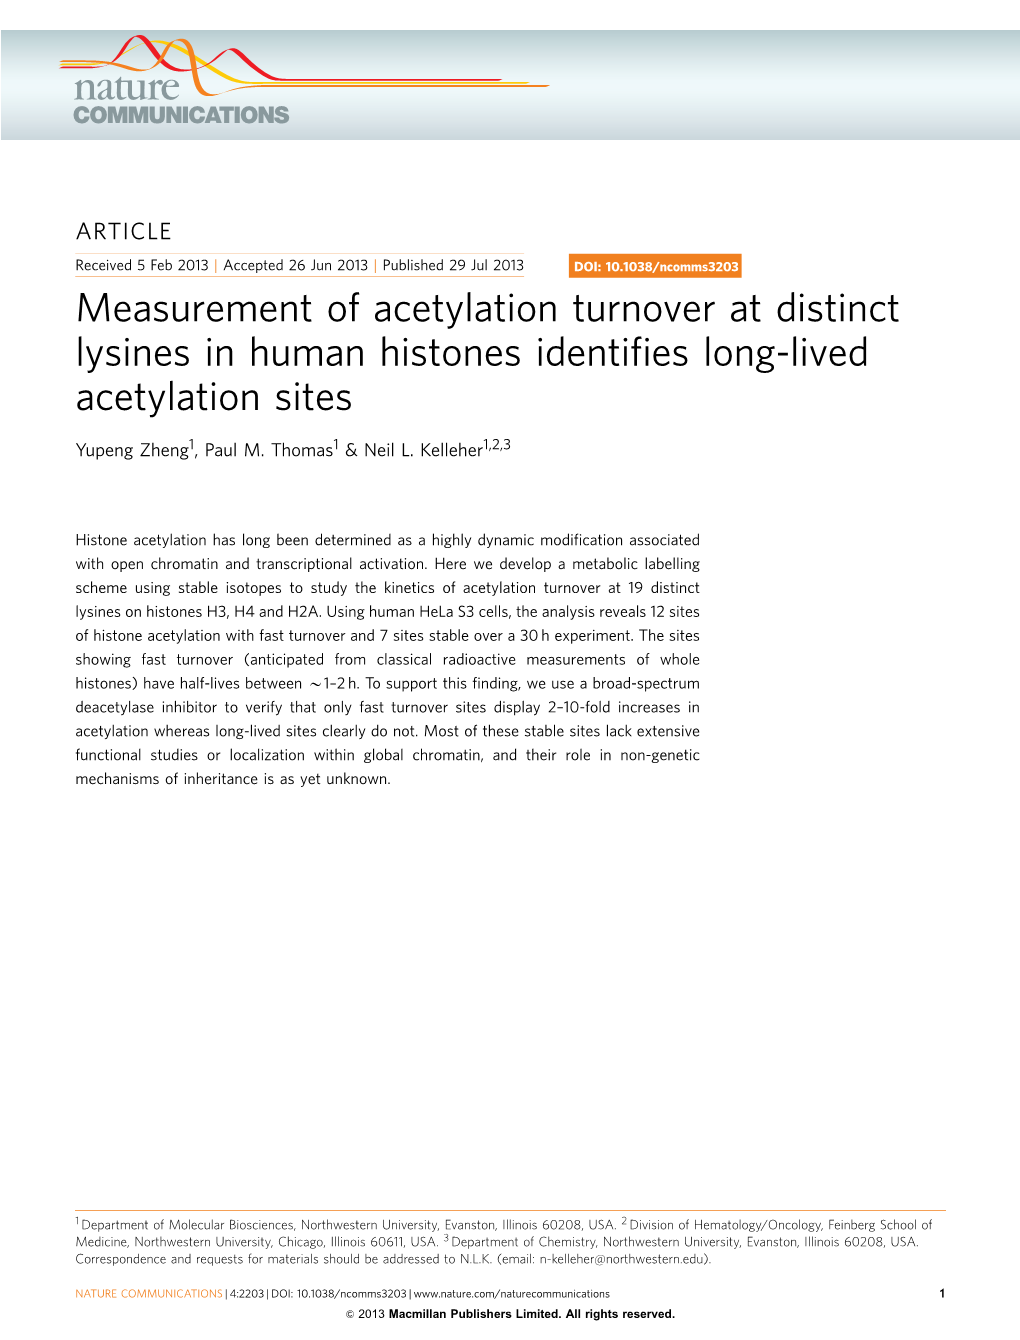 Measurement of Acetylation Turnover at Distinct Lysines in Human Histones Identiﬁes Long-Lived Acetylation Sites